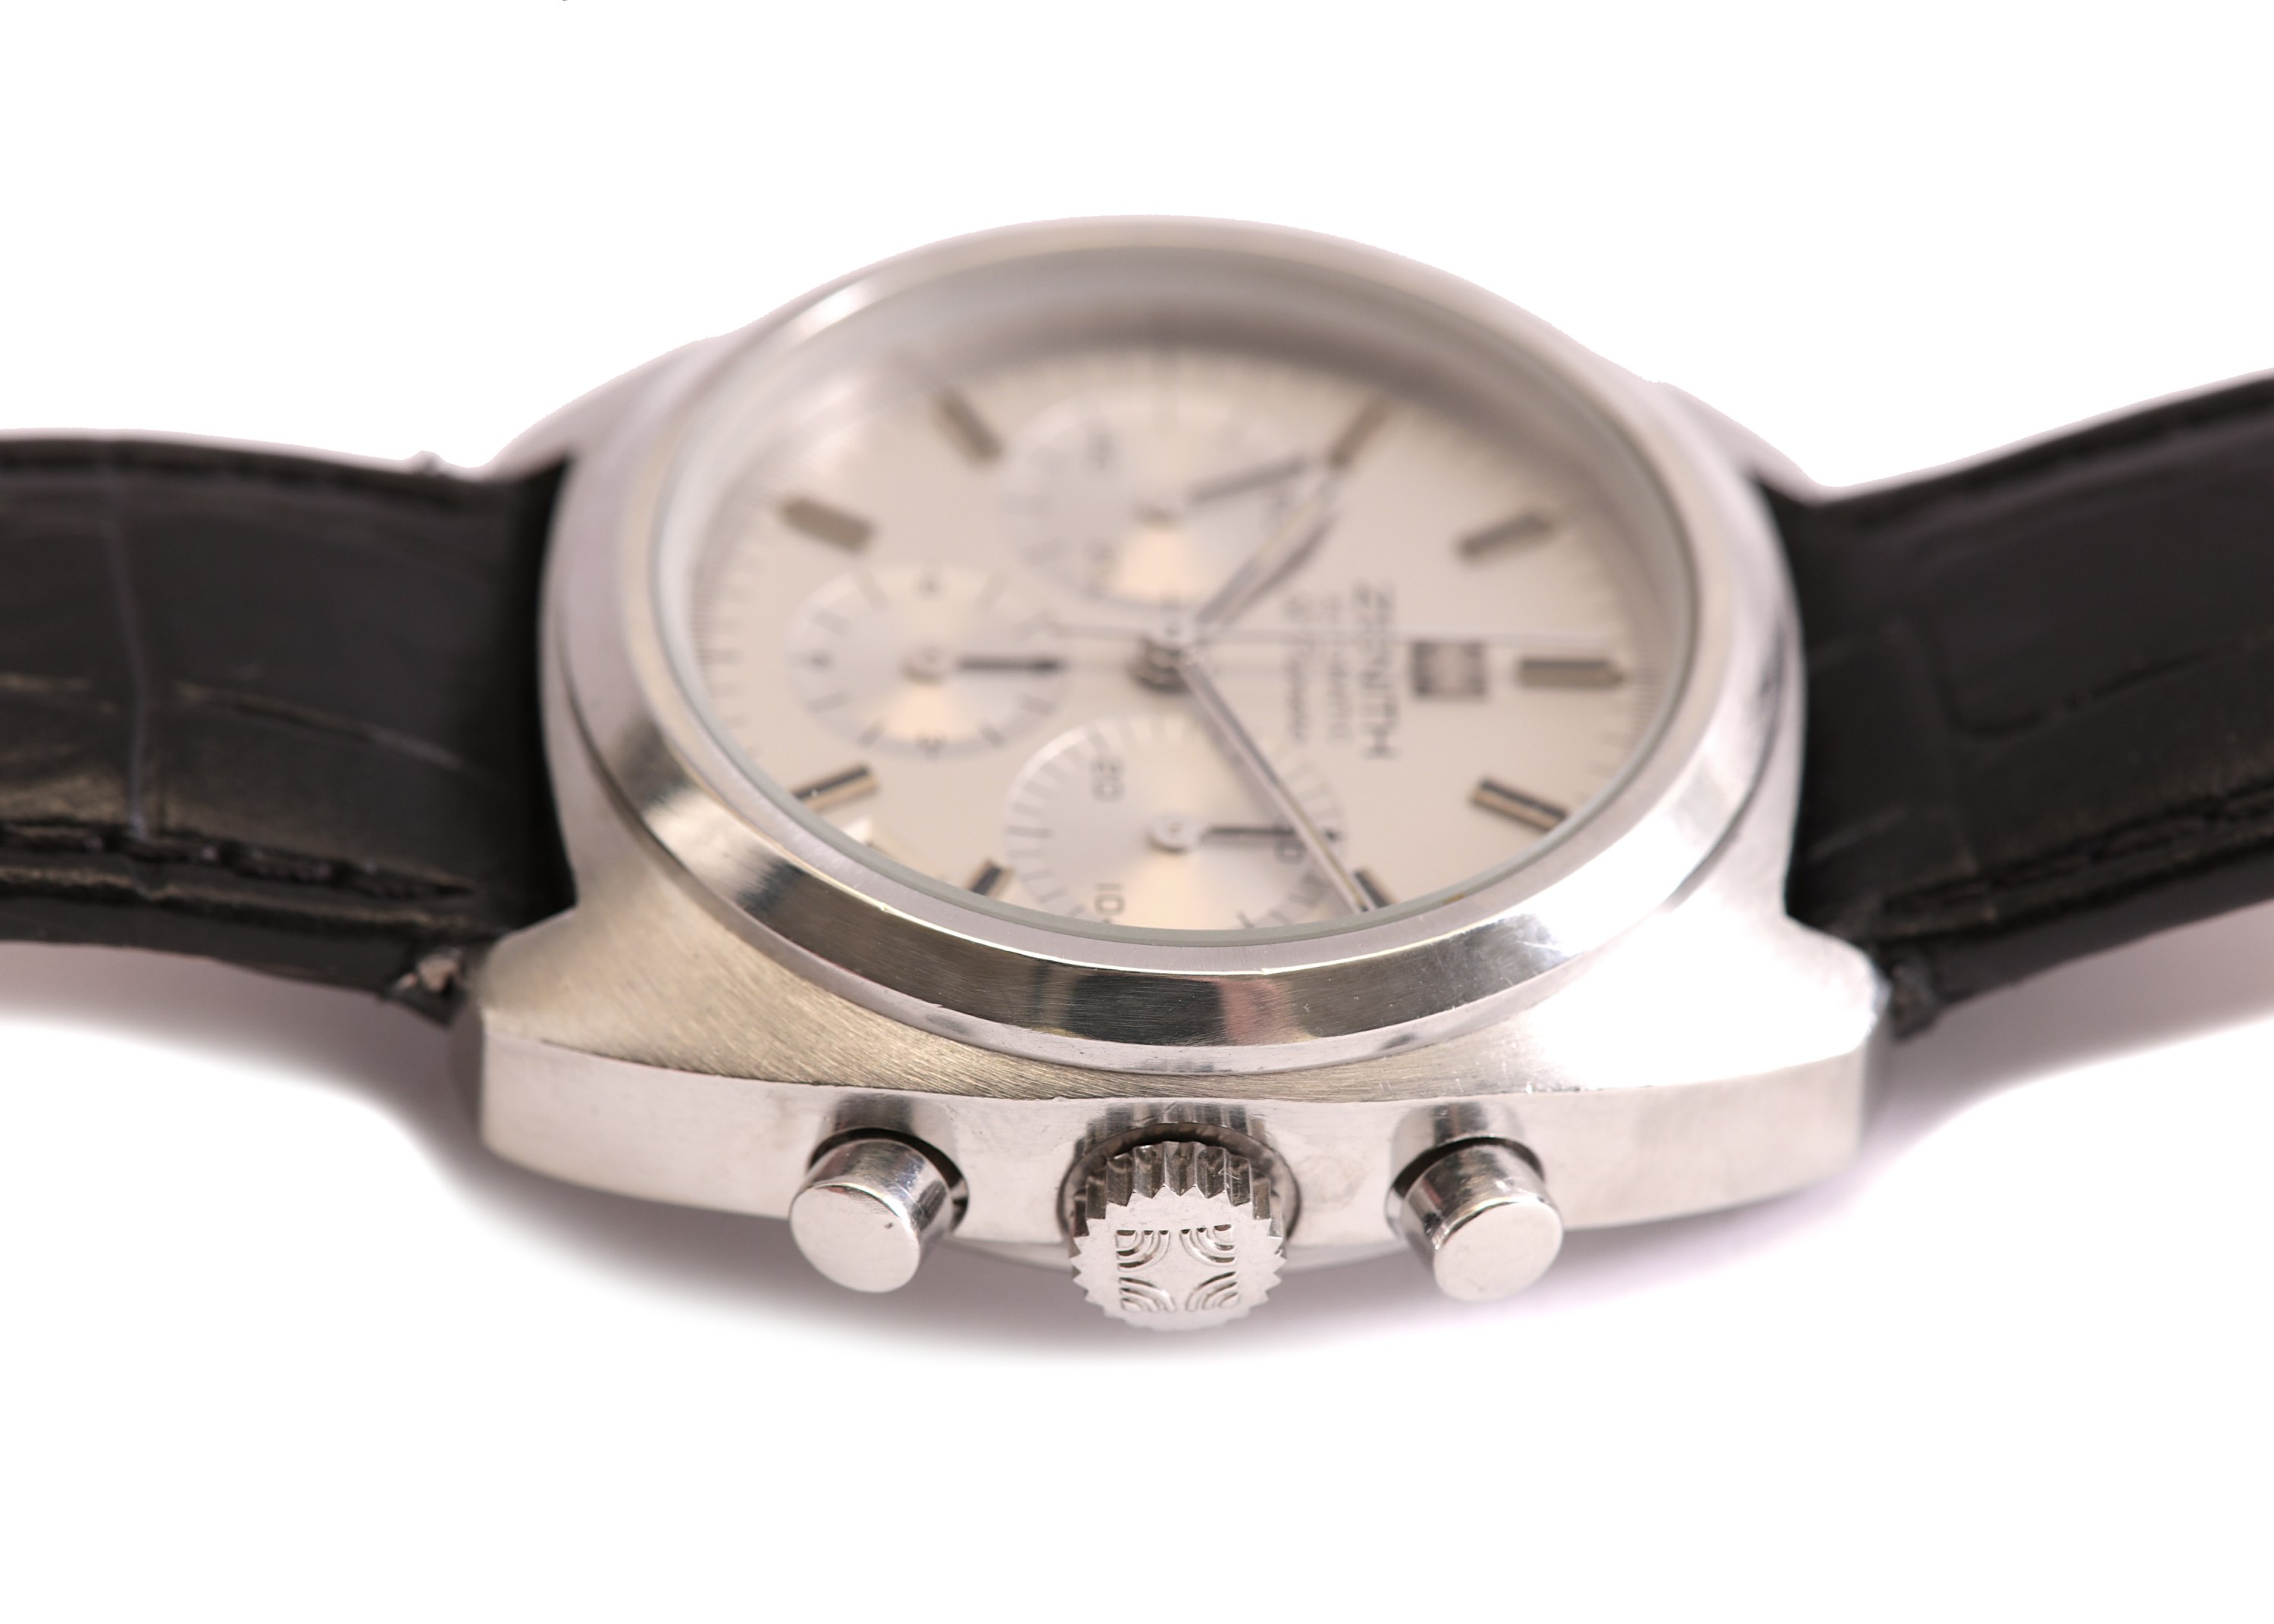 ZENITH. A STAINLESS STEEL AUTOMATIC CHRONOGRAPH WRISTWATCH. Model: El Primero. Reference: 01-0210- - Image 2 of 6